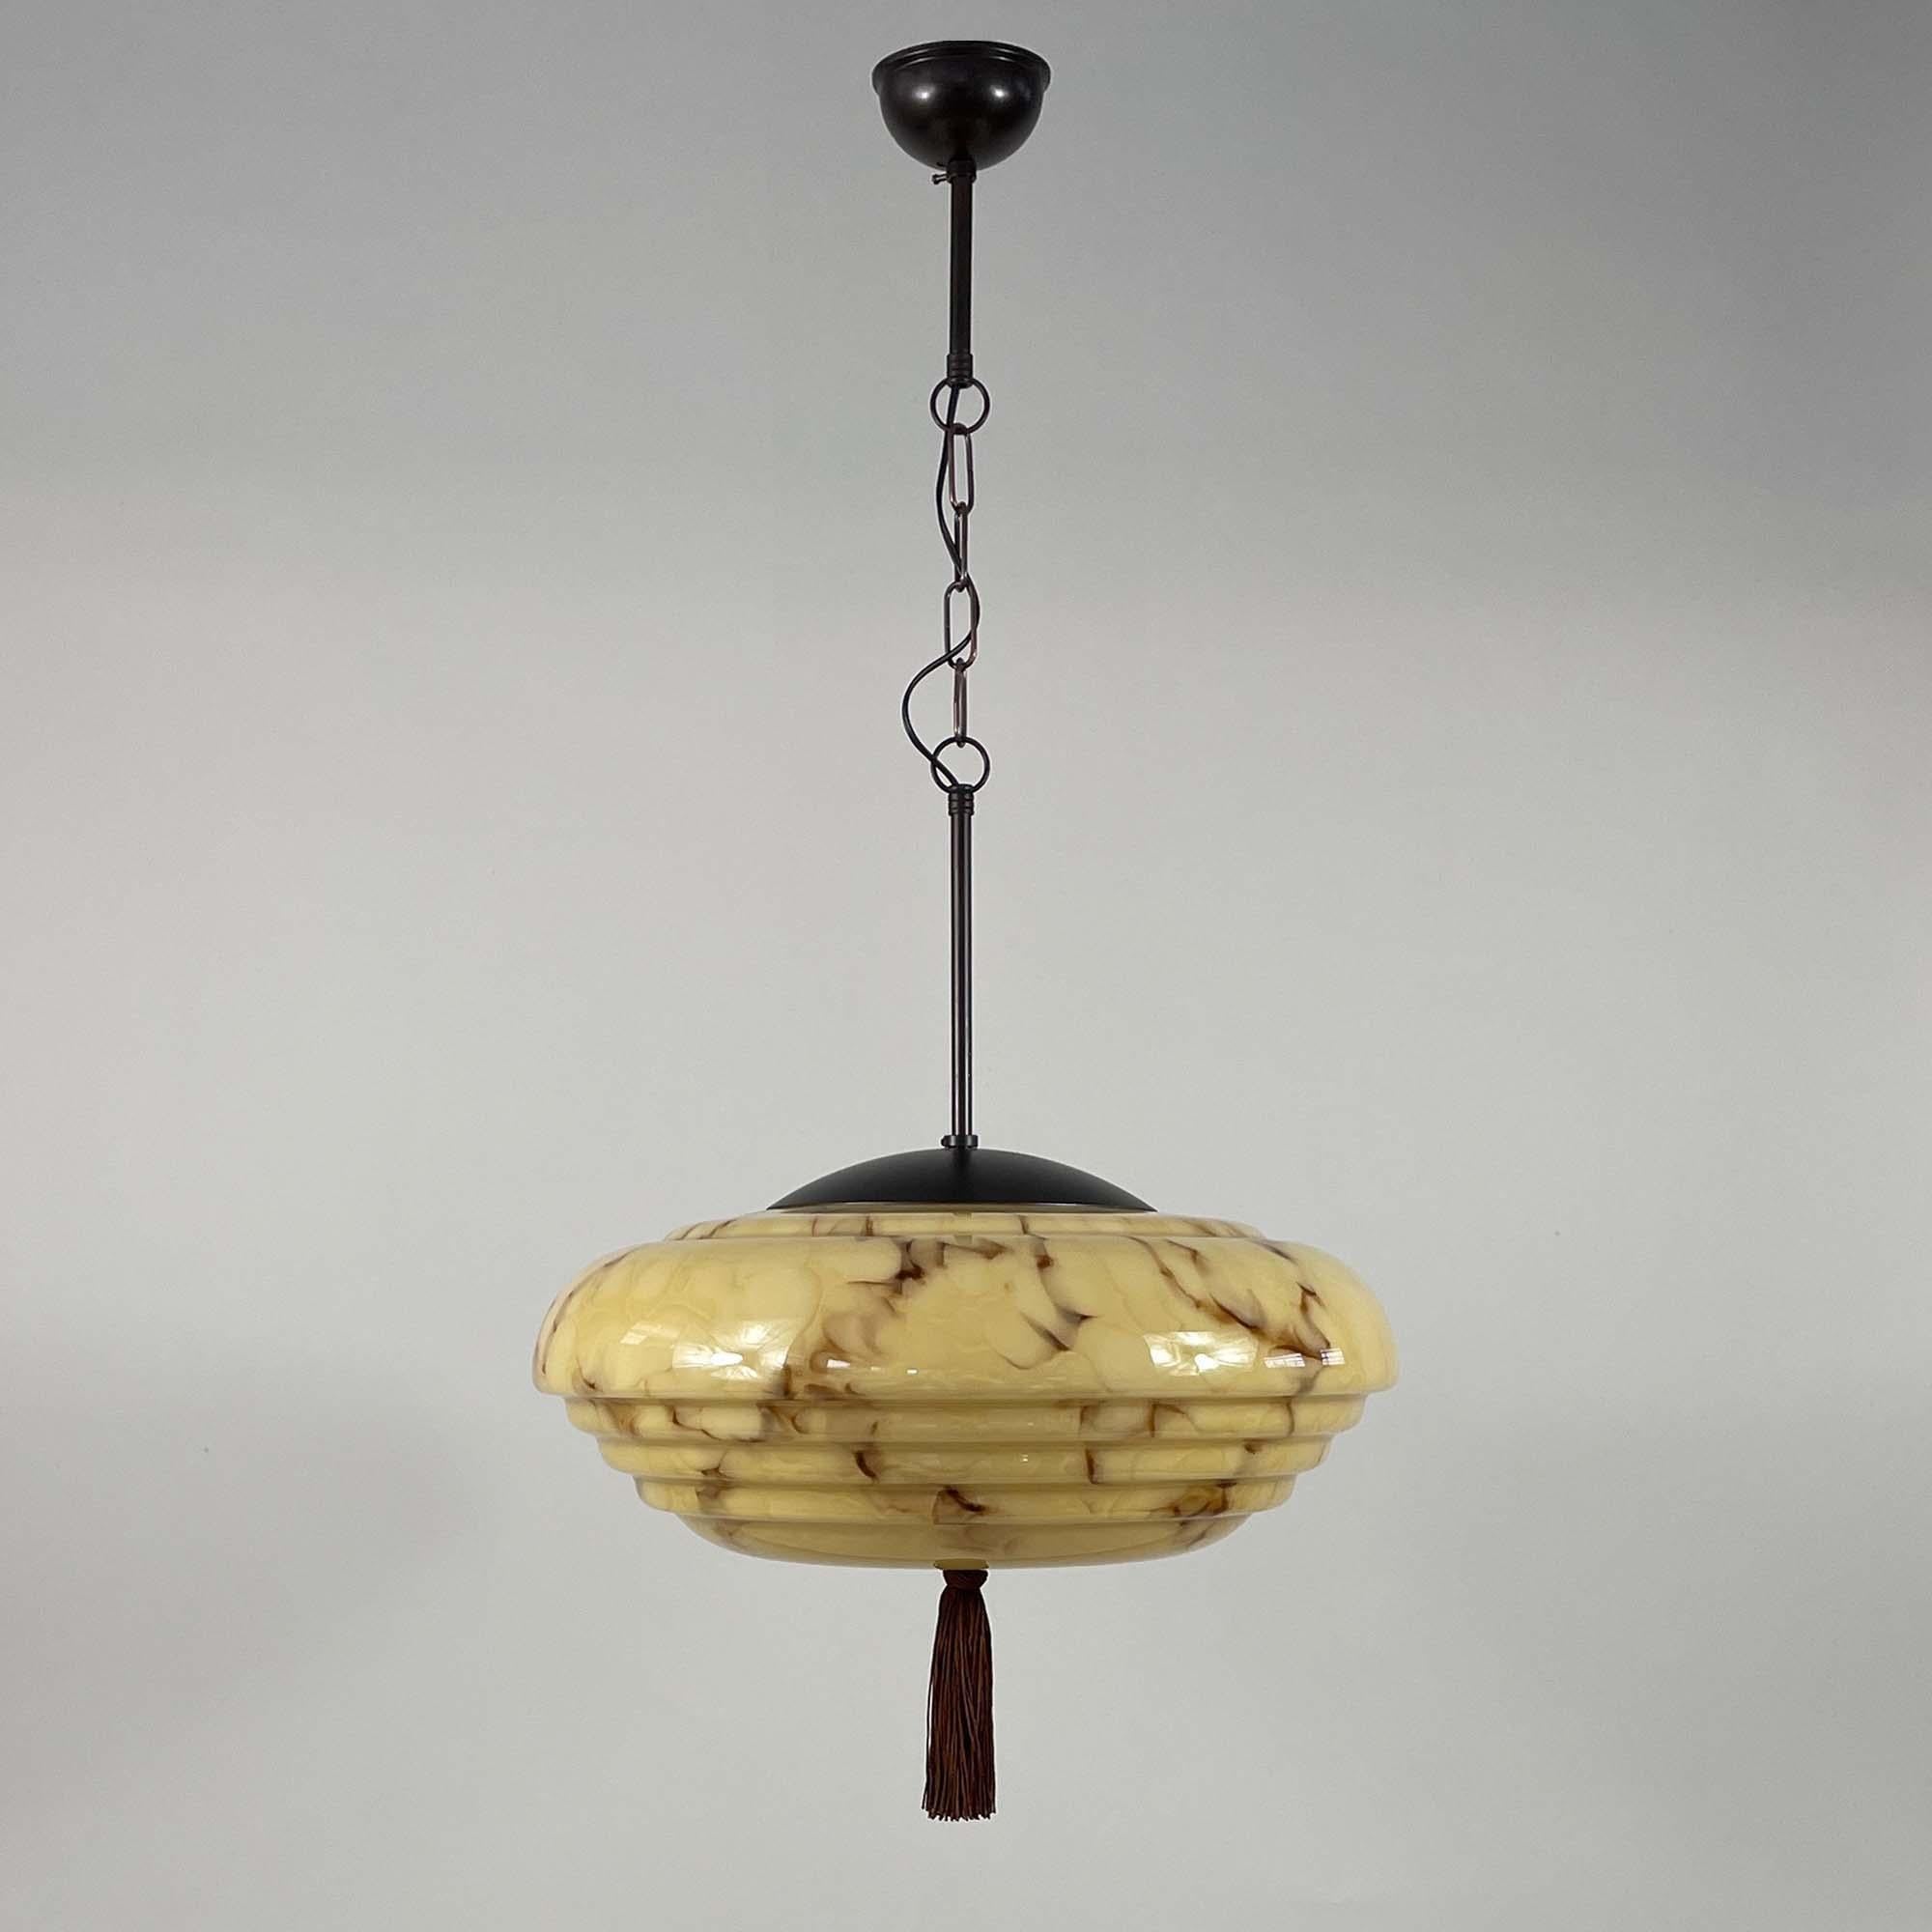 This unusual large pendant was designed and manufactured in Germany during the Bauhaus Period in the 1920s to 1930s.

It features a large dark cream / sand colored opaline glass lampshade with brown marbled decor, bronzed / burnished metal hardware